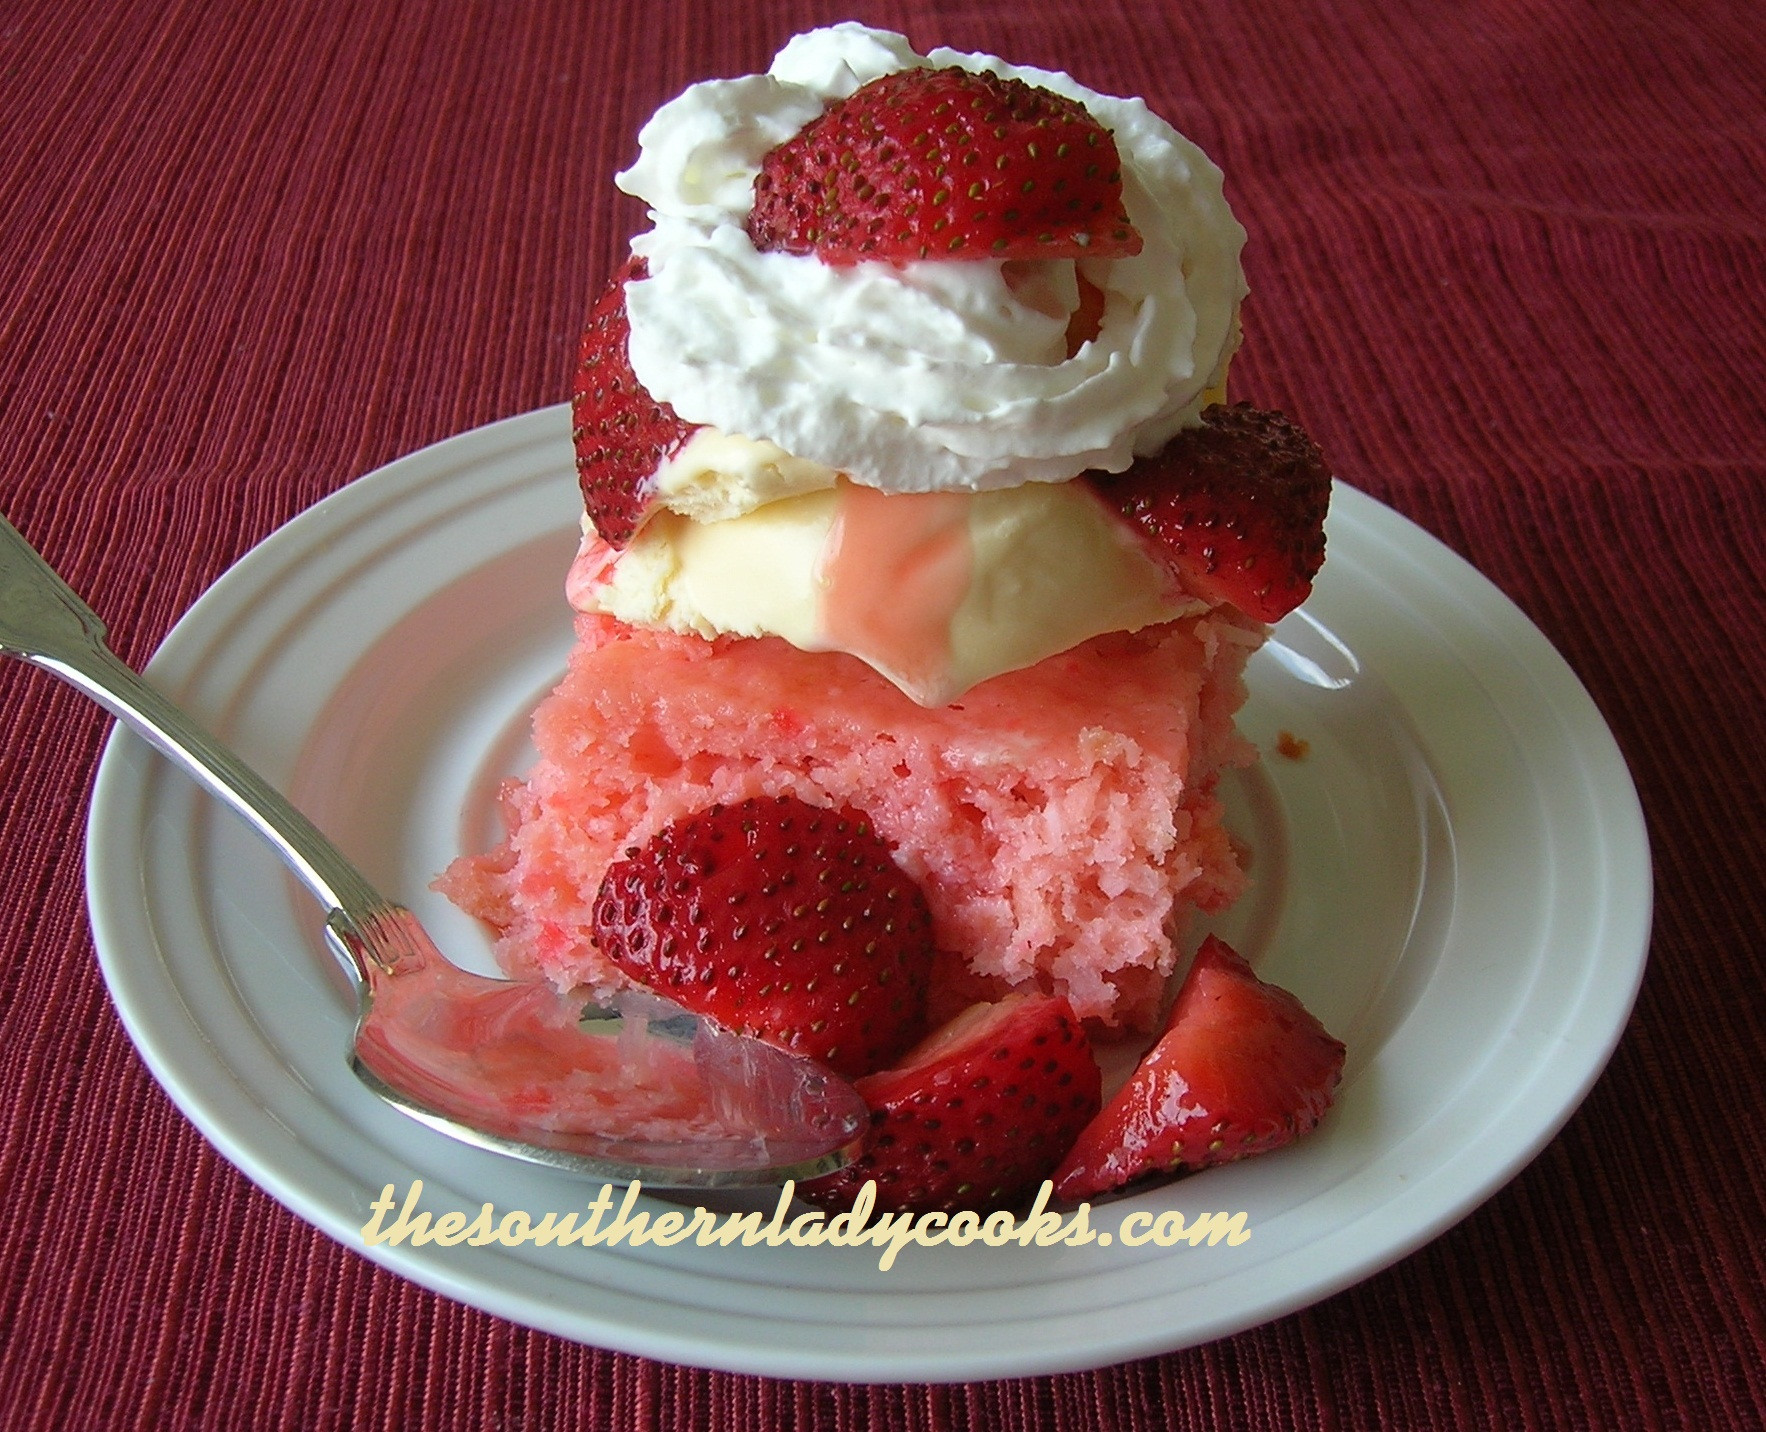 Strawberry Desserts Easy
 EASY STRAWBERRY DESSERT The Southern Lady Cooks